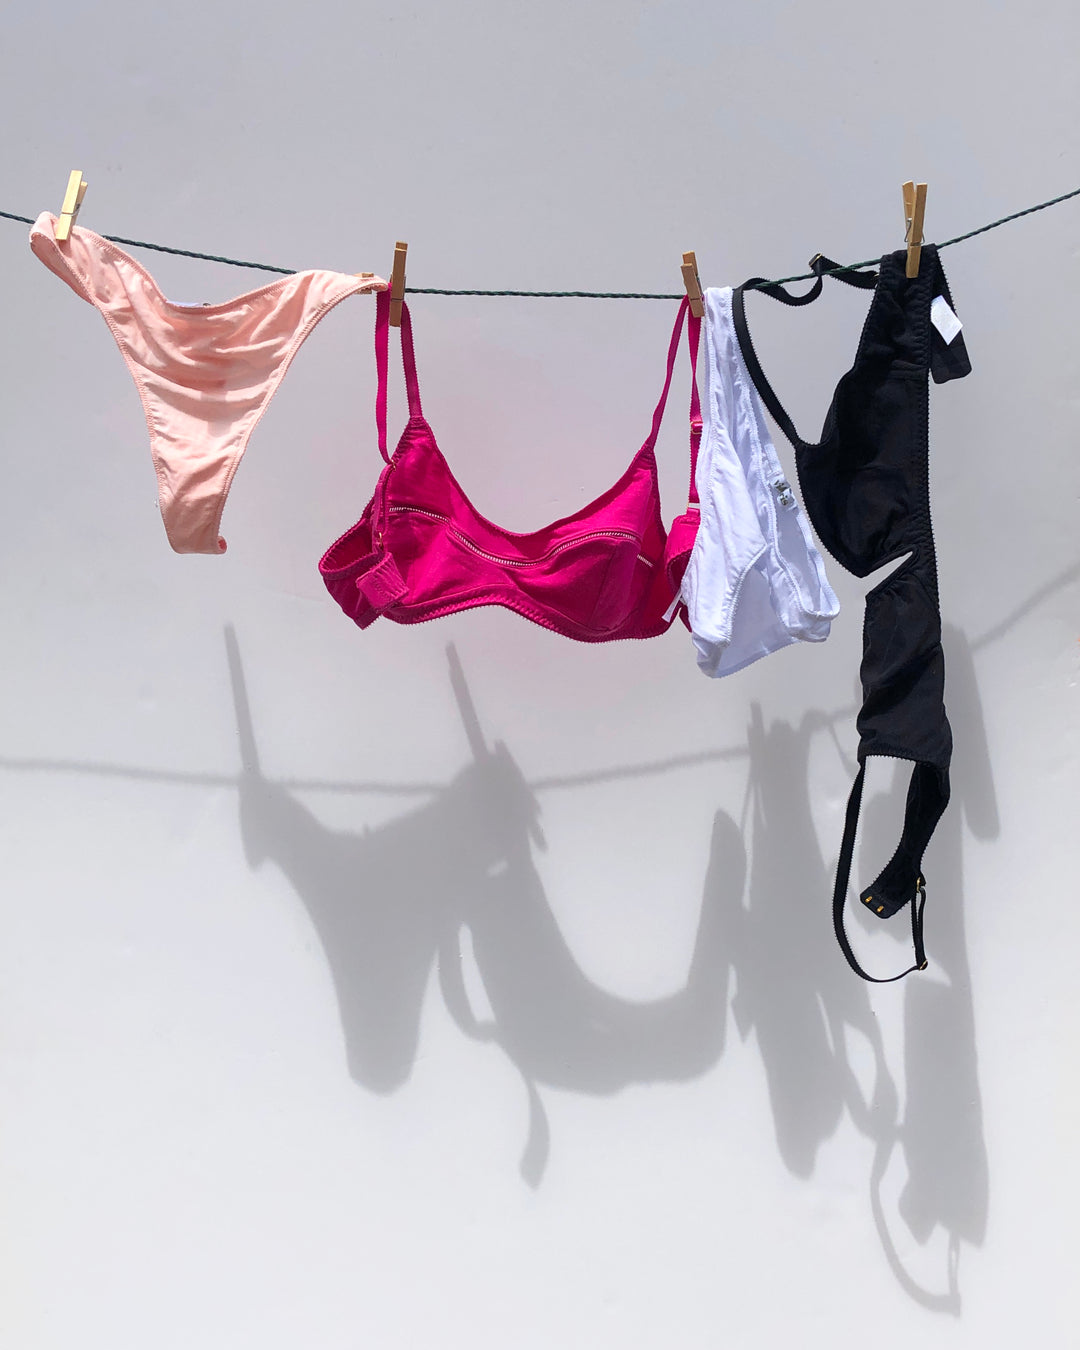 Whitney bikini in Rosy Pink, Maggie Bra in Bohemian Pink, Whitney Bikini in Pure White, Angela Bra in Shield Black. We create Lingerie that is non-toxic, breathable and most importantly Oeko-Tex Standard 100 certified. No PFAS!